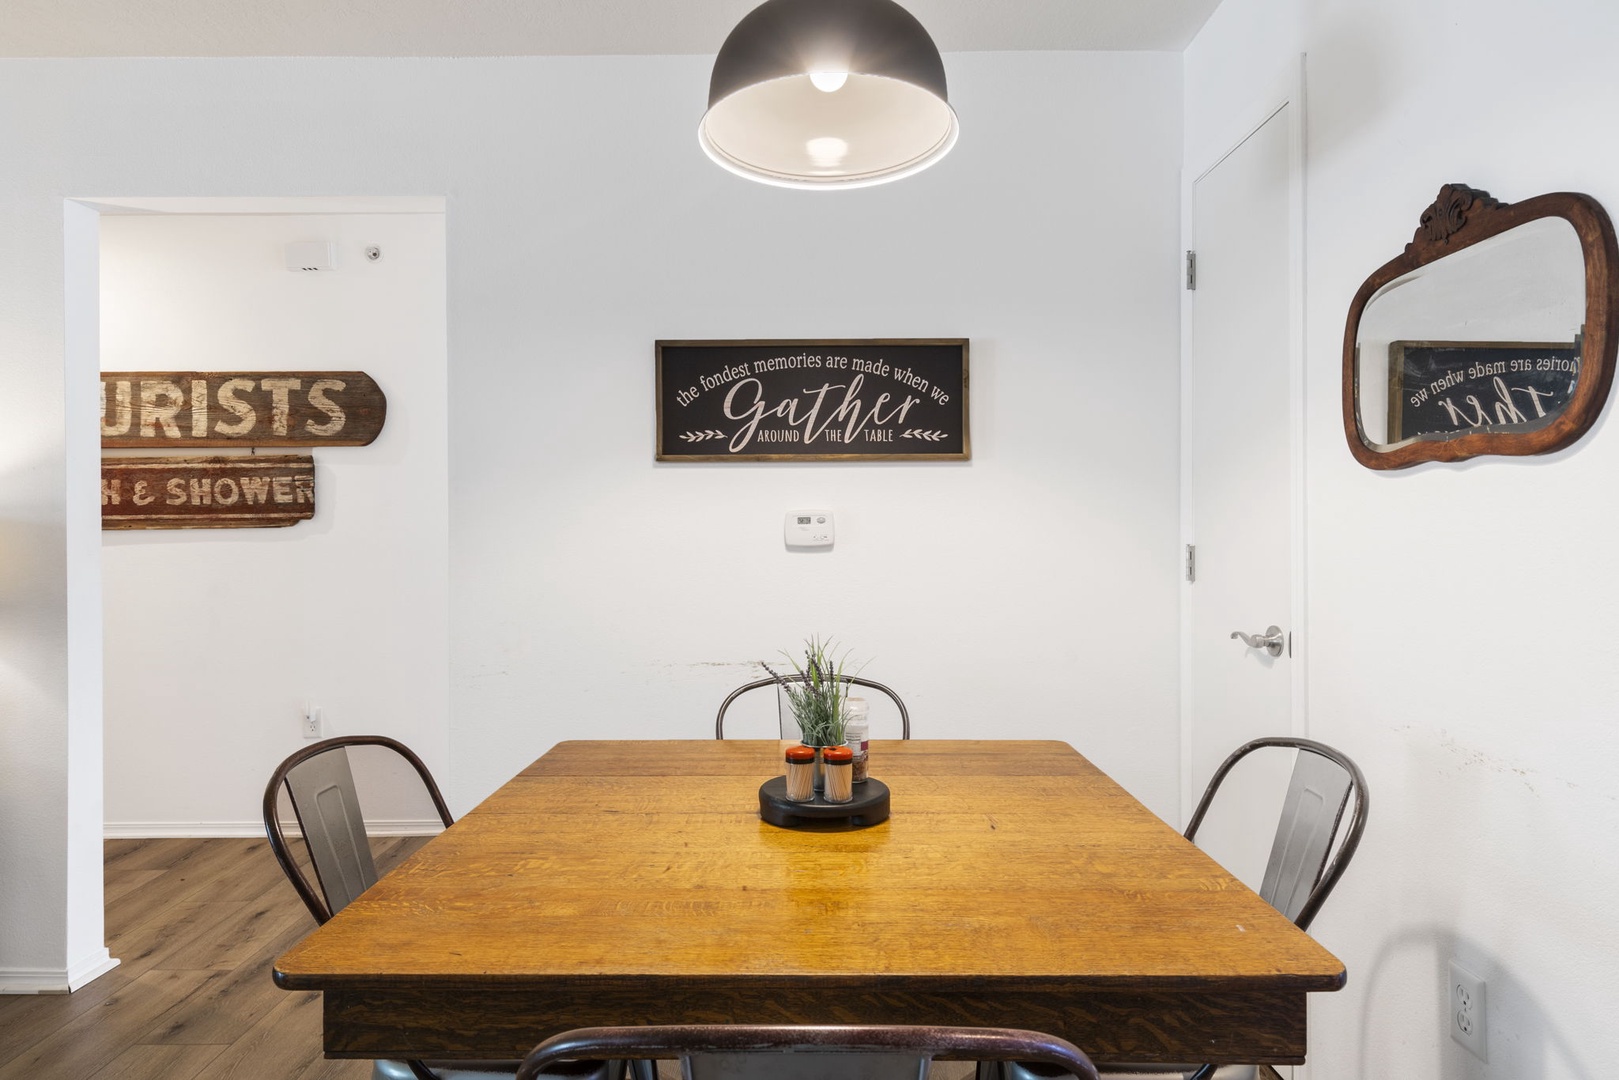 Gather around the rustic dining table, offering seating for 4